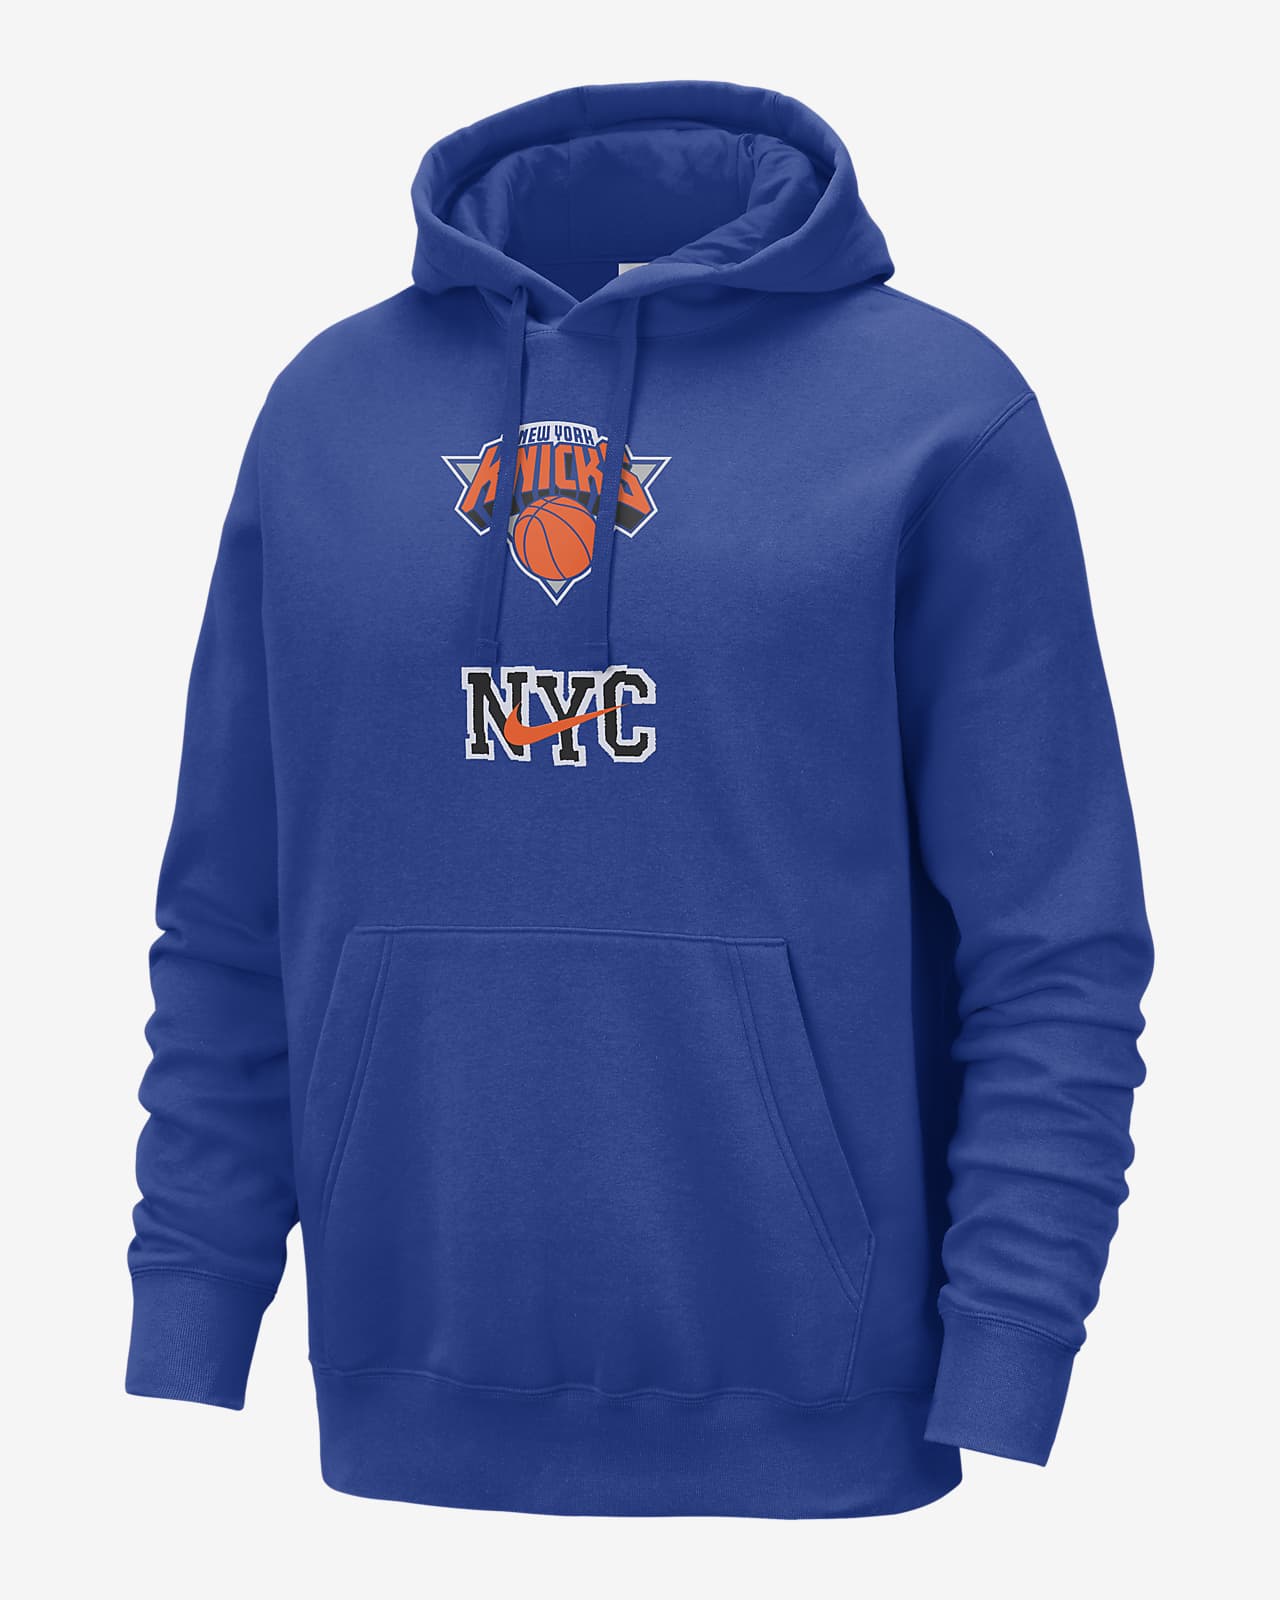 https://static.nike.com/a/images/t_PDP_1280_v1/f_auto,q_auto:eco/18645b57-8106-4a02-87ab-520c7be37882/new-york-knicks-club-fleece-city-edition-mens-nba-pullover-hoodie-8gzptk.png